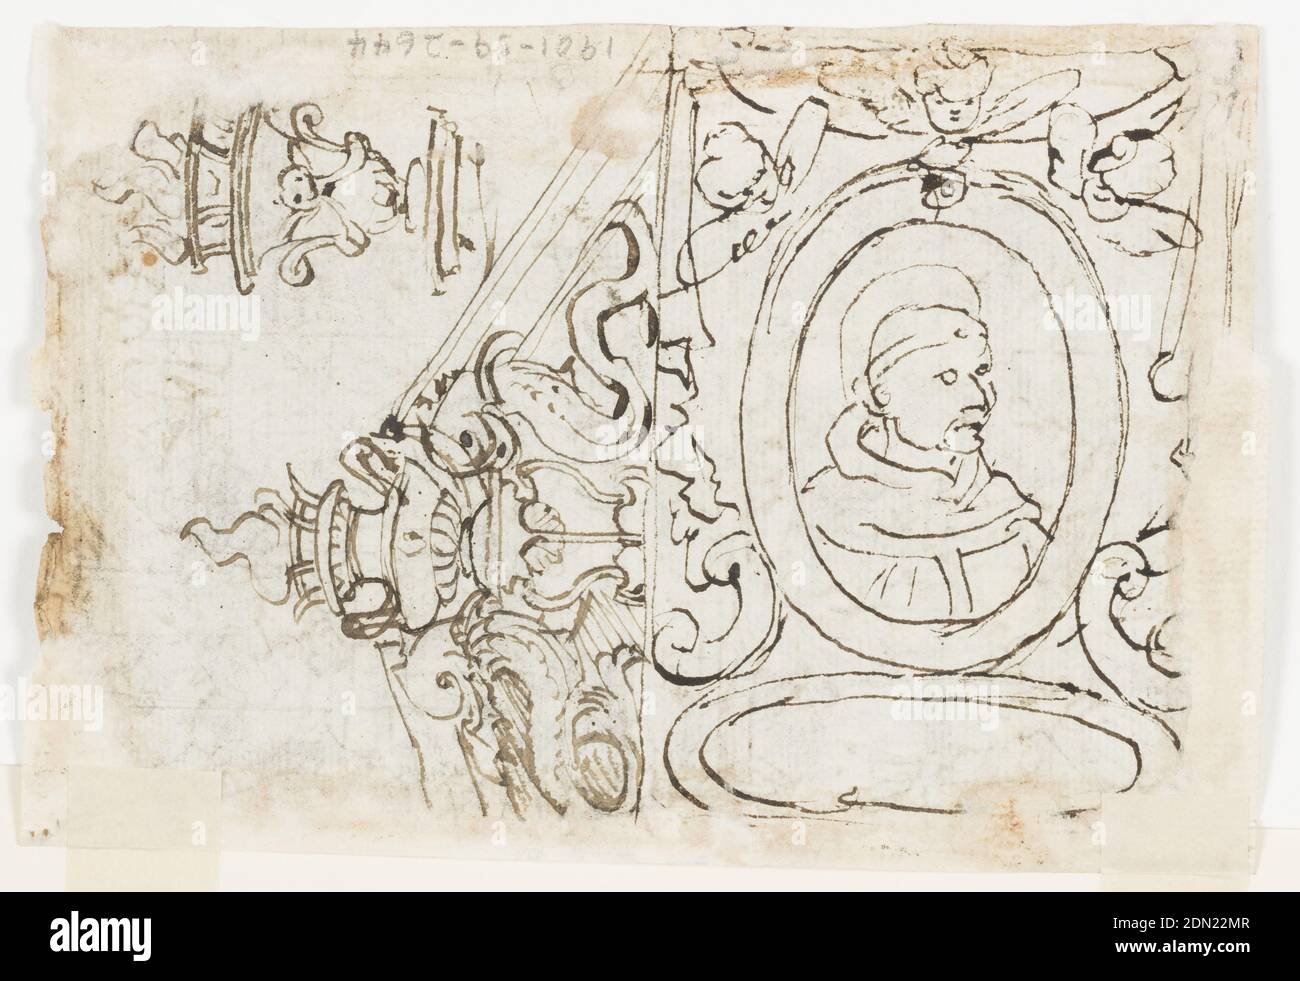 Page of a sketchbook; Heavenly powers helping pious; Sketch for potrait of saint; Decoration of pediment, Jan van der Straet, called Stradanus, Flemish, 1523–1605, Bistre, pen and ink, wash on paper, Horizontal rectangle. Verso, at left side: St. Anthony Hermit, with Tan cross and bell, stands at the right of the bed. Hell is represented in front of the bed. At left are two flying angels and a third person, fragmentary, covering the dying person. The upper one of the angels holds a scroll. Above, at right, the bands of Christ, God the Father, and Mary. The Dove flies before God the Father Stock Photo